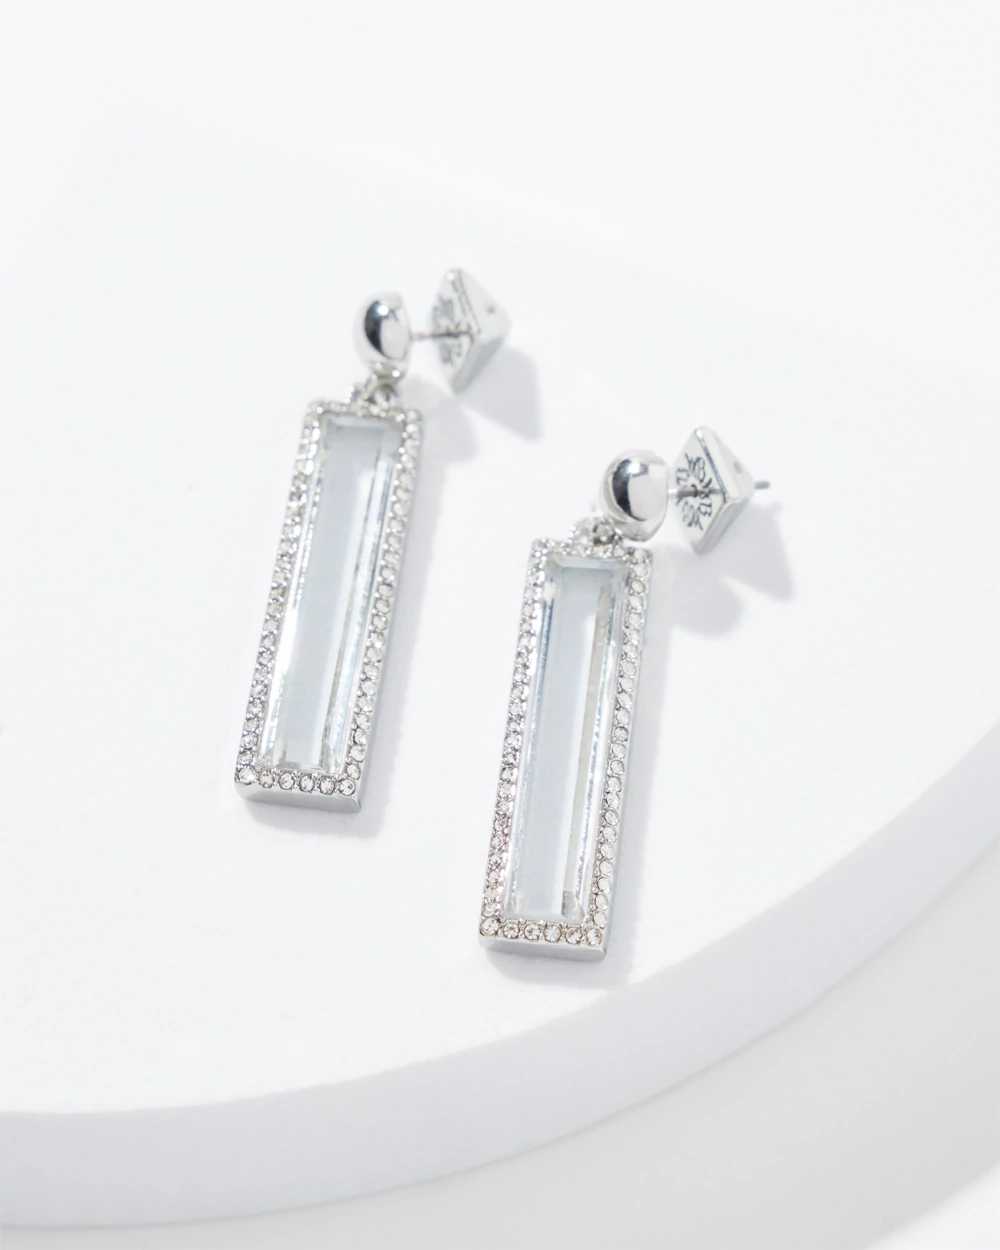 Silver Pave Crystal Linear Earrings click to view larger image.